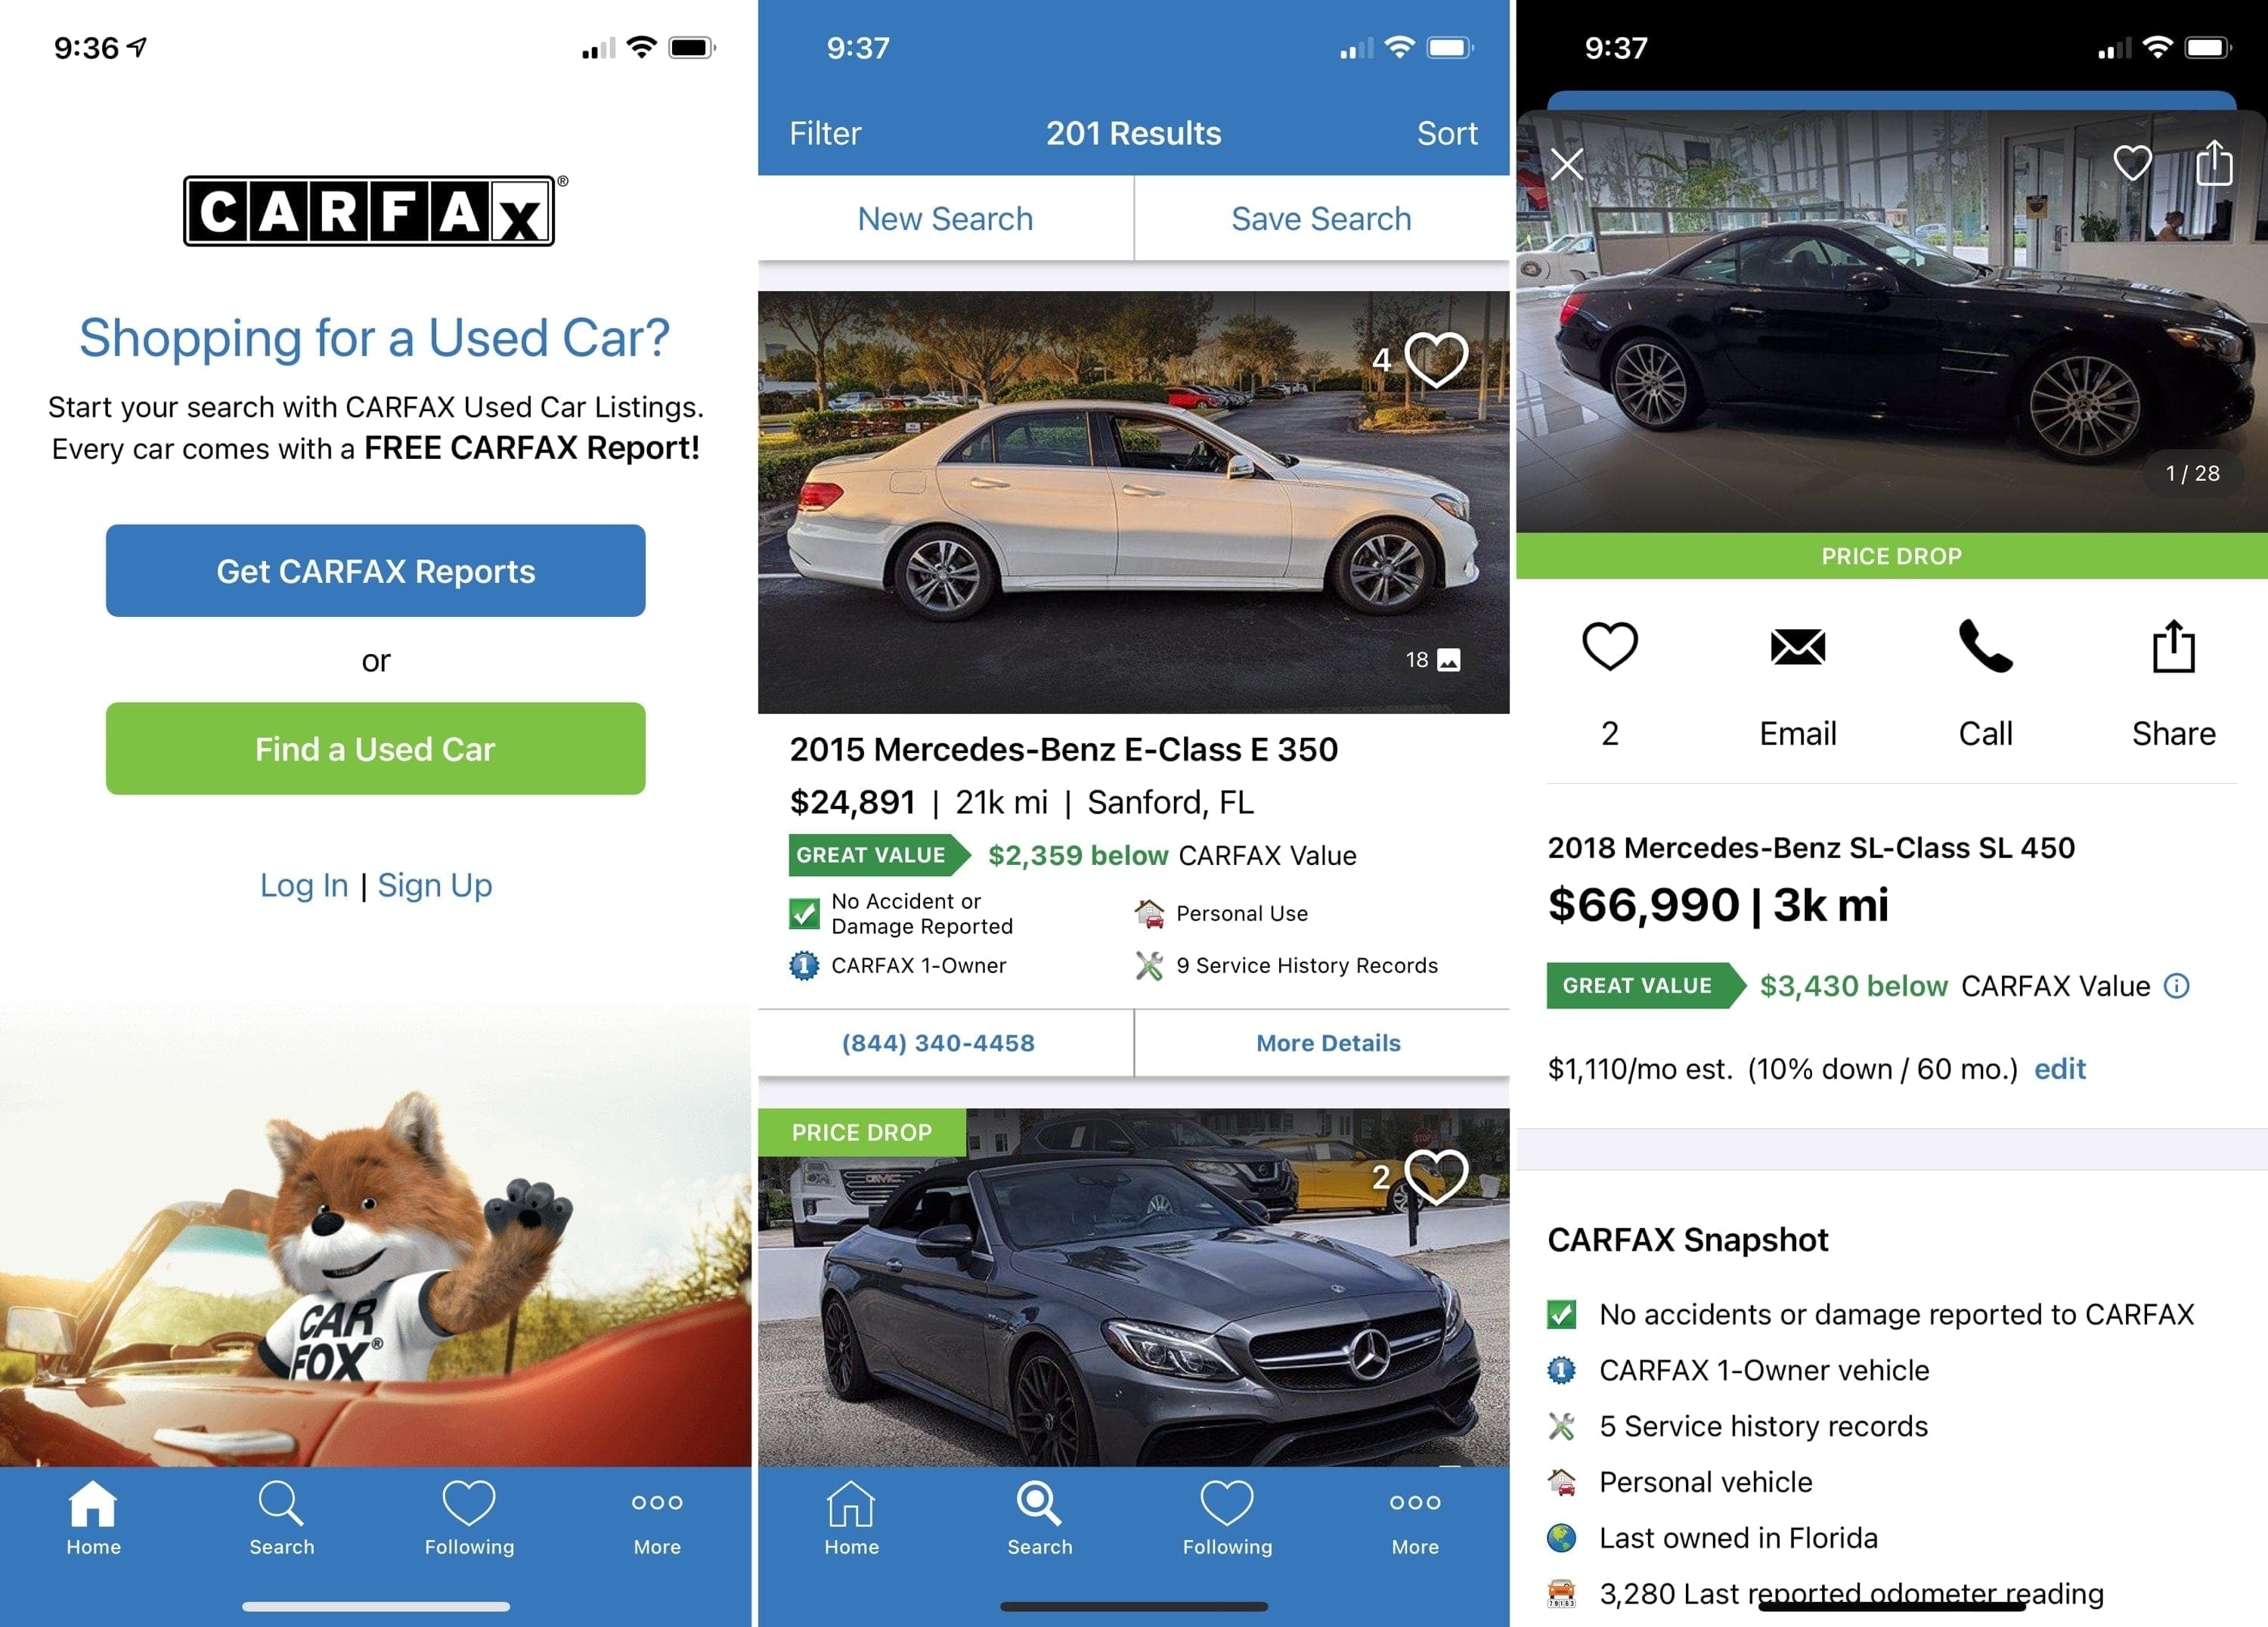 Apps for buying a car - CarFax on iPhone